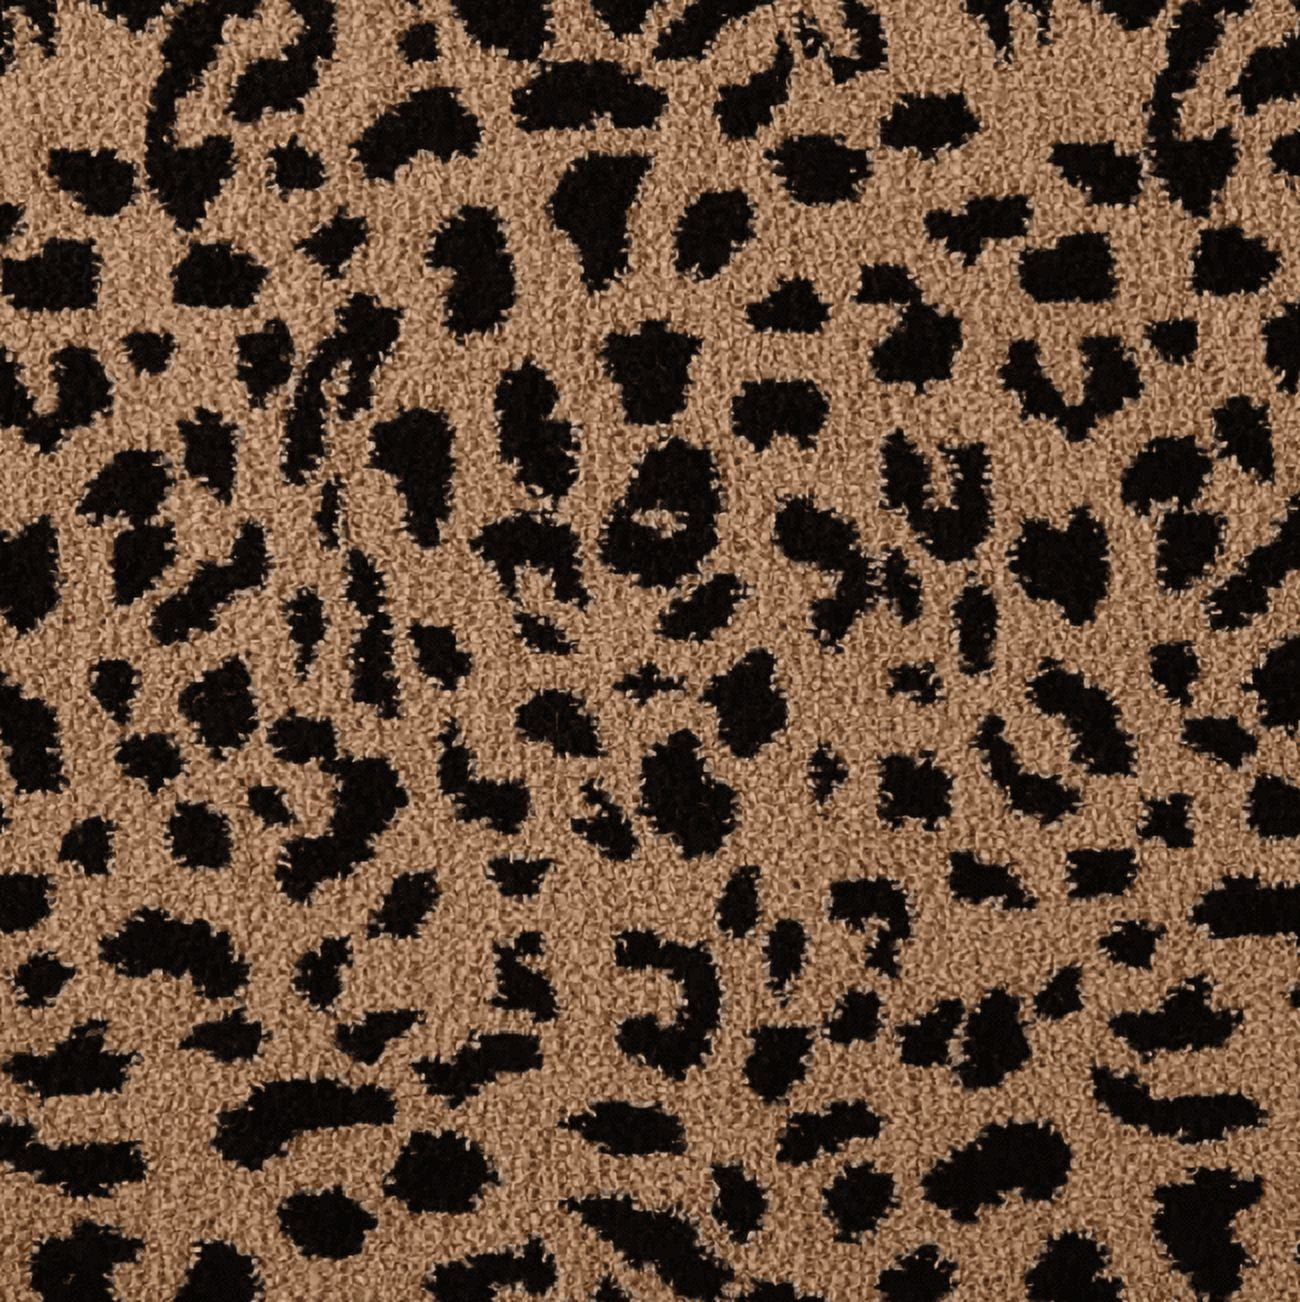 Perfectly Cozy Leopard Sweater In Camel • Impressions Online Boutique